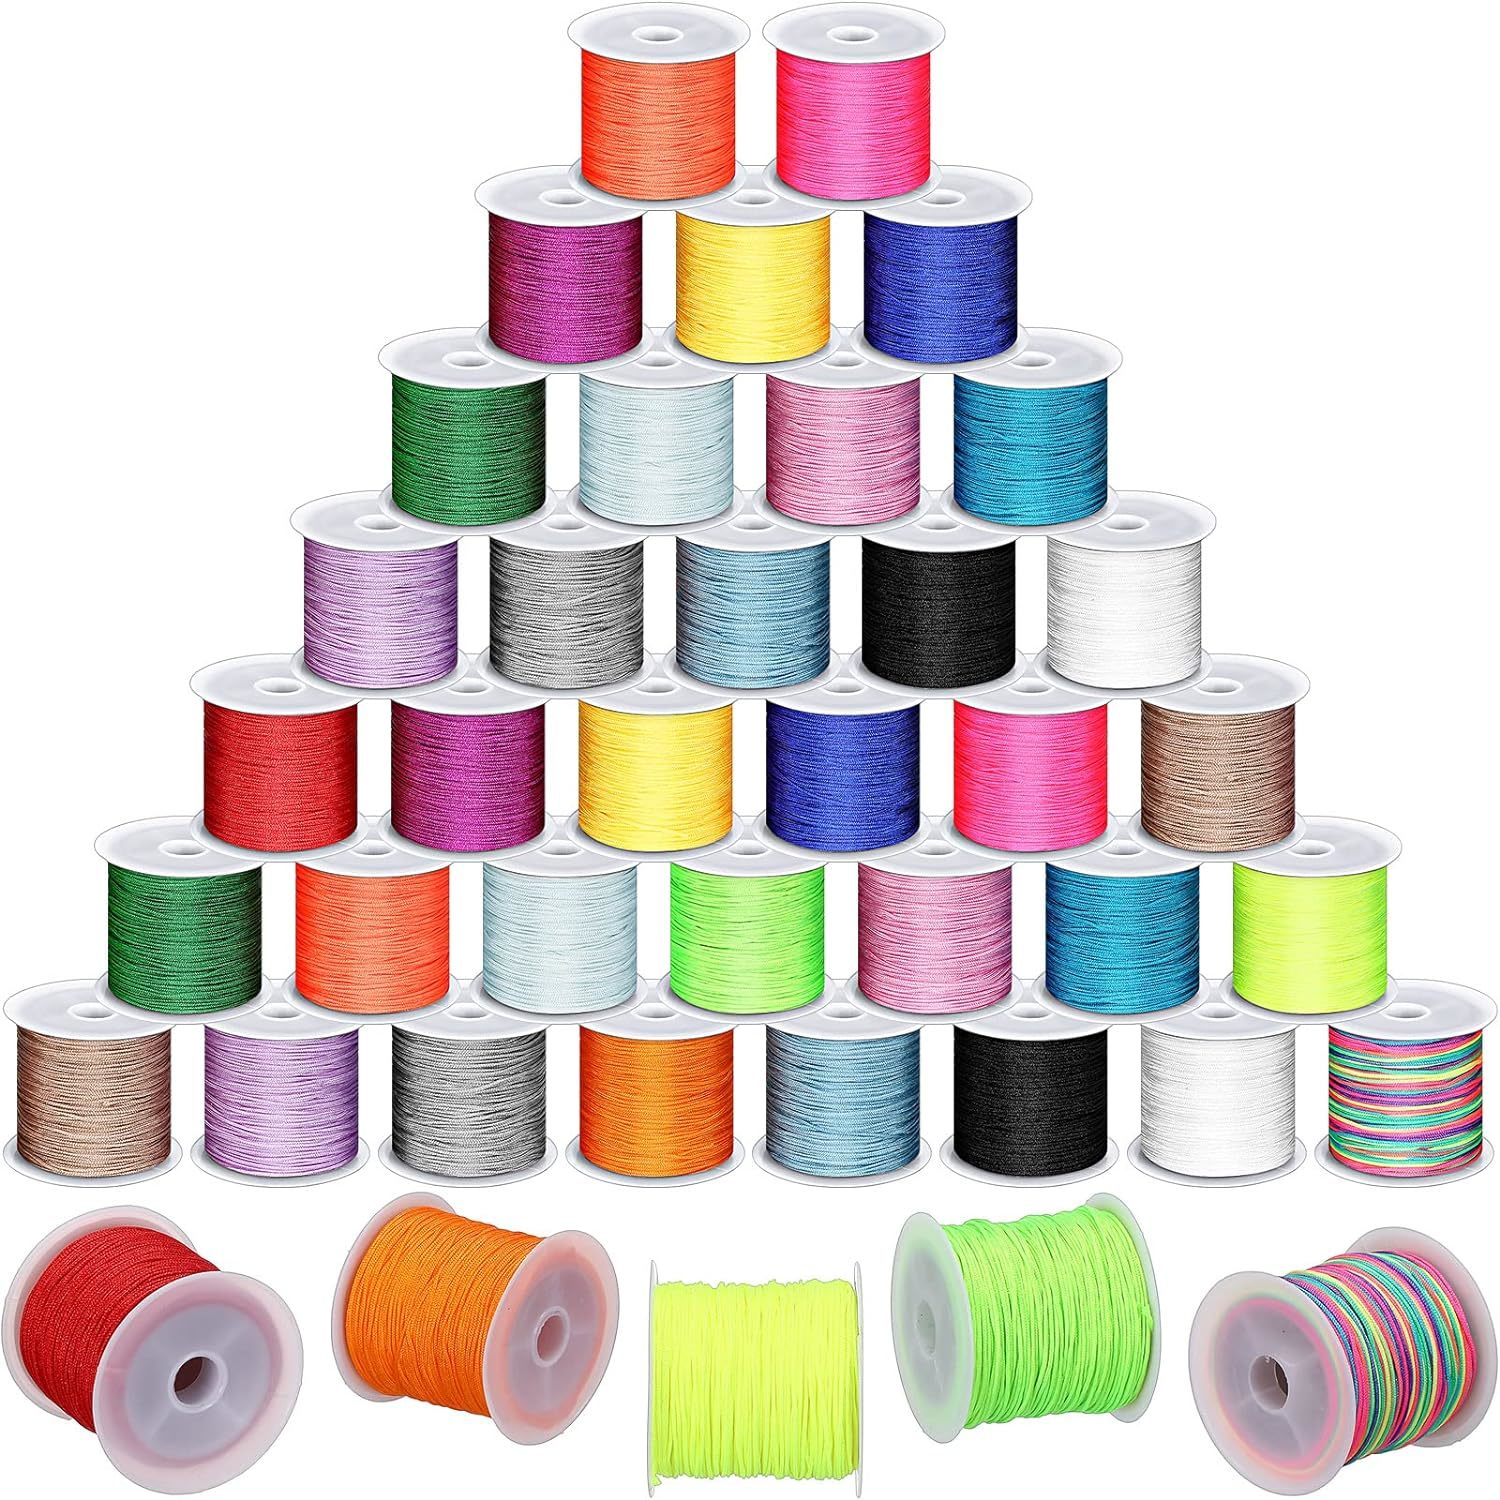 30 Rolls 0.8 mm Nylon String for Bracelets, 30 Colors Nylon Cord for  Jewelry Making Mixed Beading Thread Chinese Knotting Cord for Braided